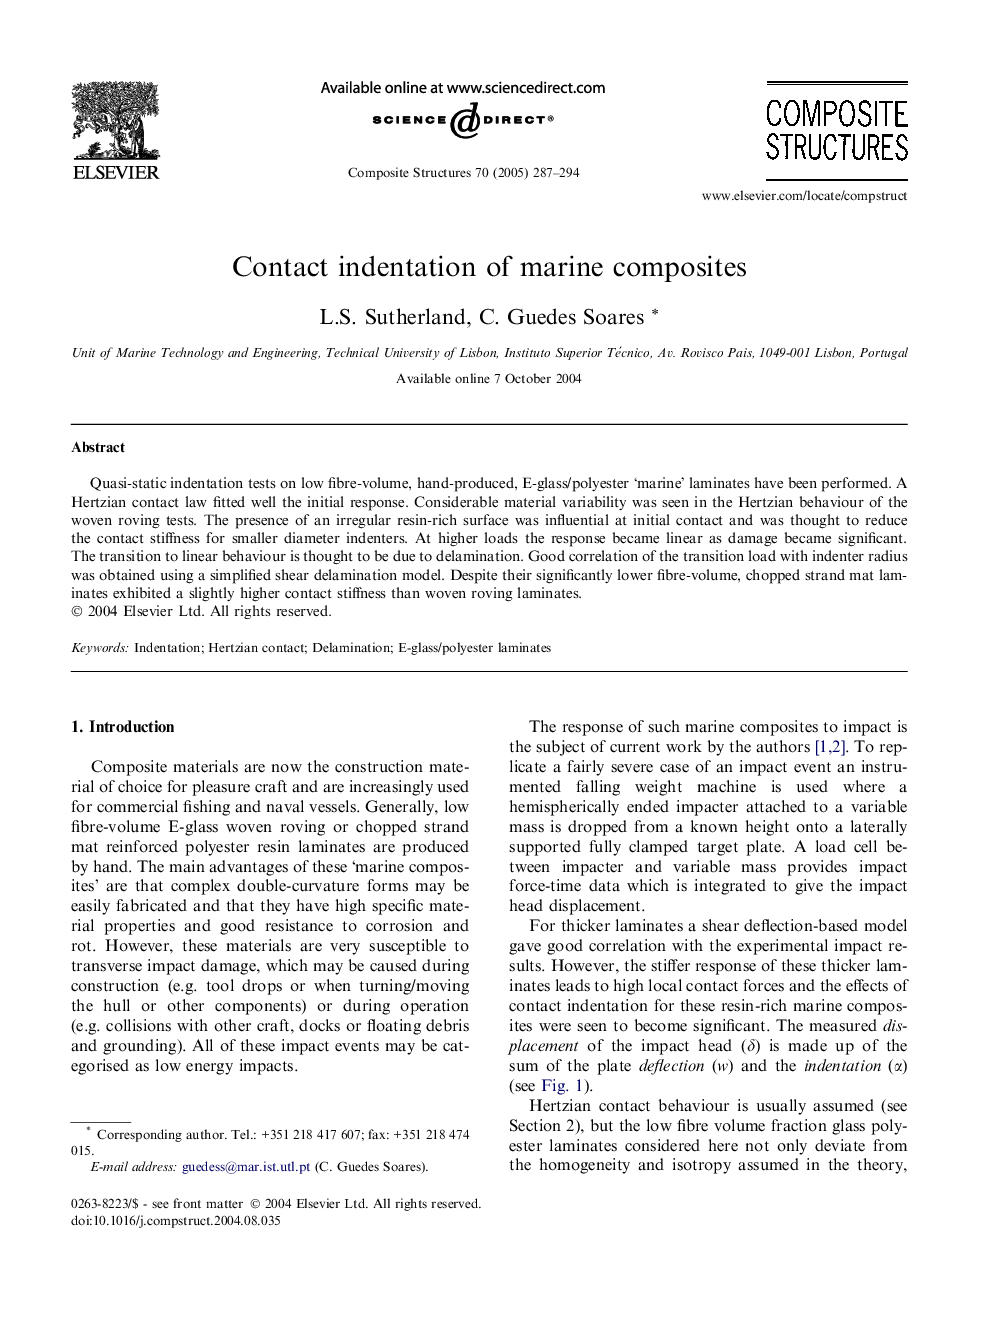 Contact indentation of marine composites